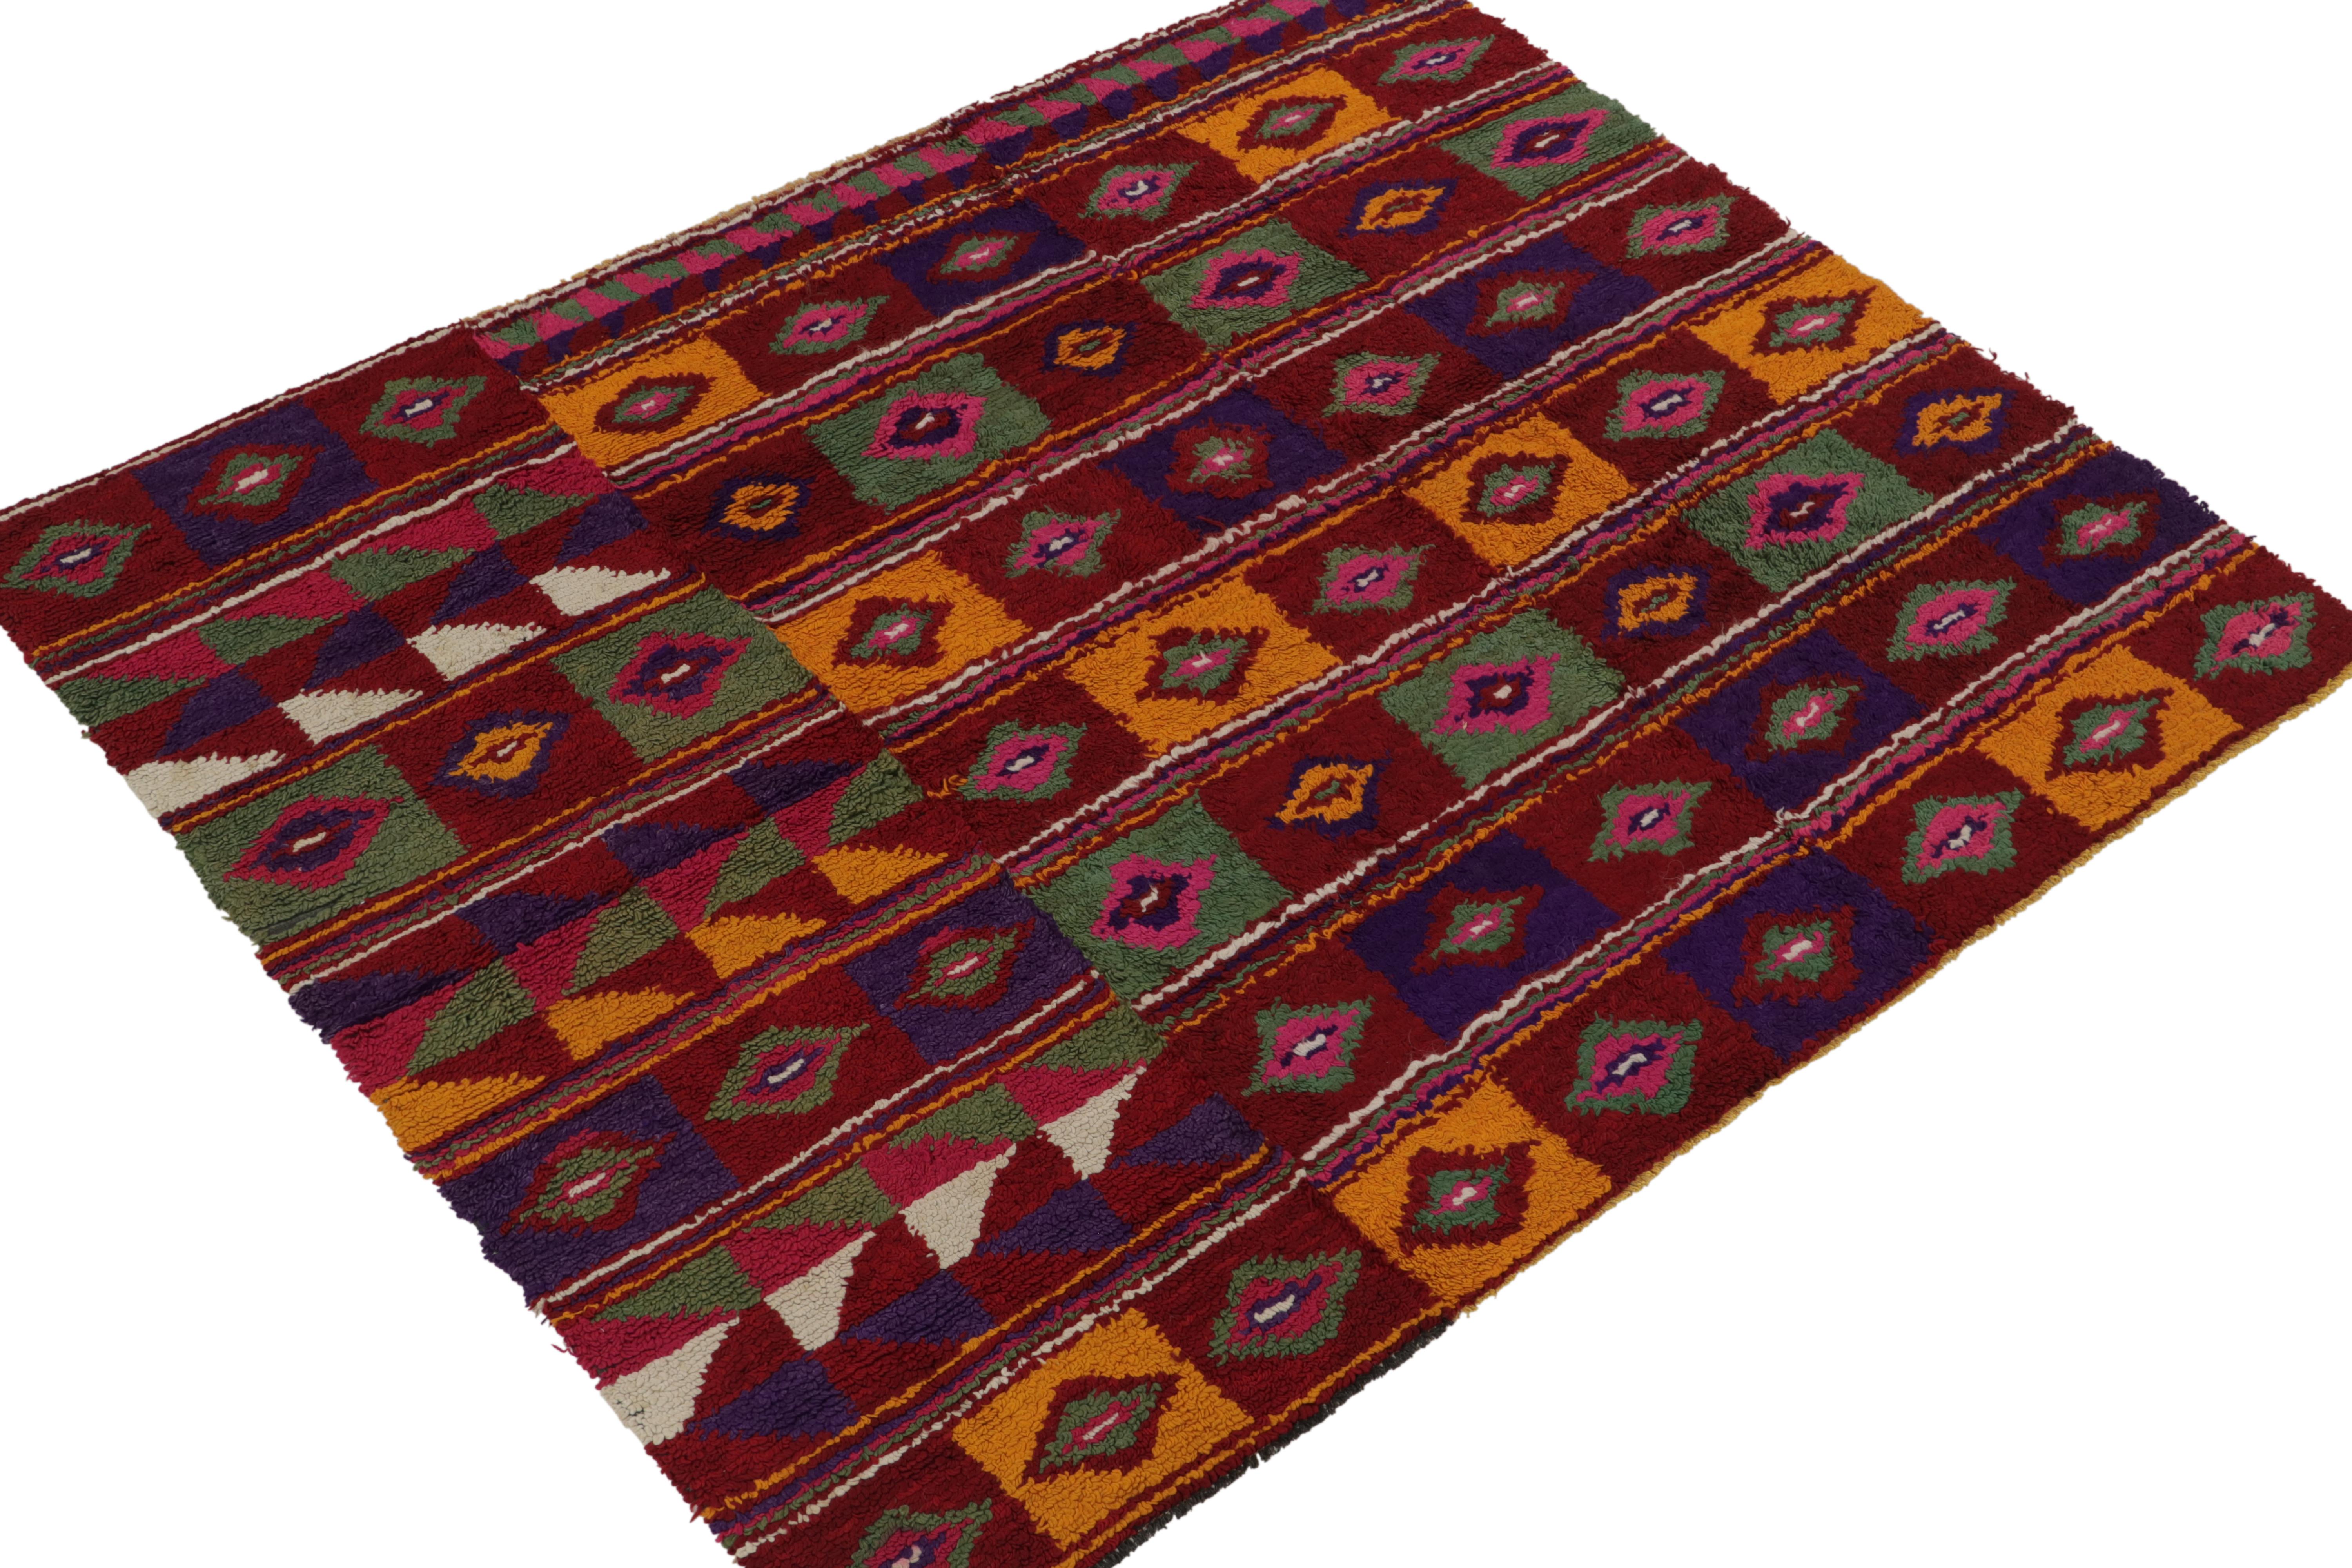 This vintage 6x7 Tulu rug is in the latest rare entries in Rug & Kilim’s tribal curations. Hand-knotted in wool from Turkey circa 1950-1960.
Further on the design:
Tulus like this are known for archaic geometric patterns and bold tribal colors